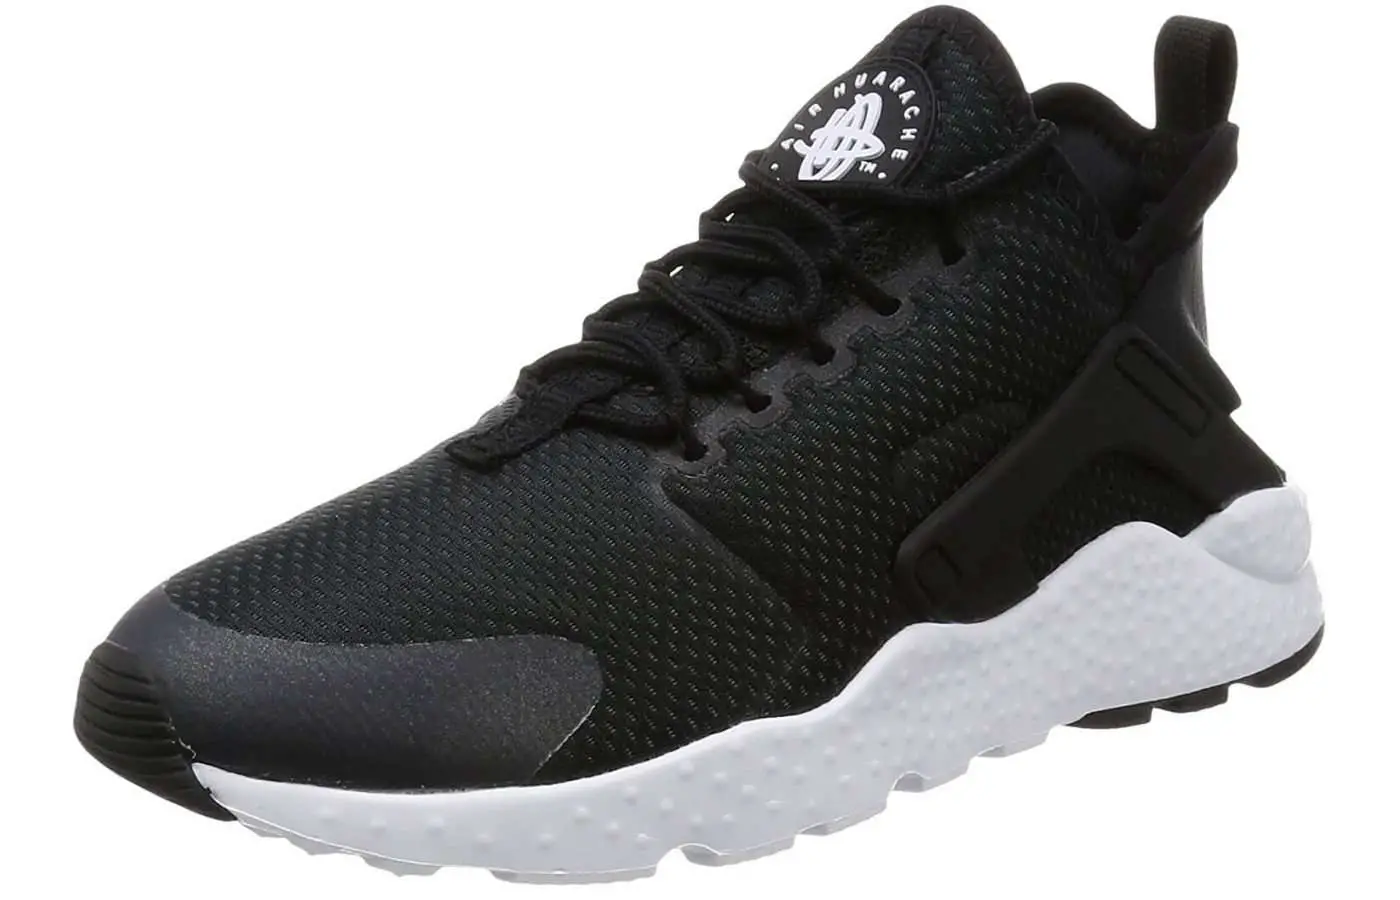 Nike Air Huarache Ultra Reviewed for Quality